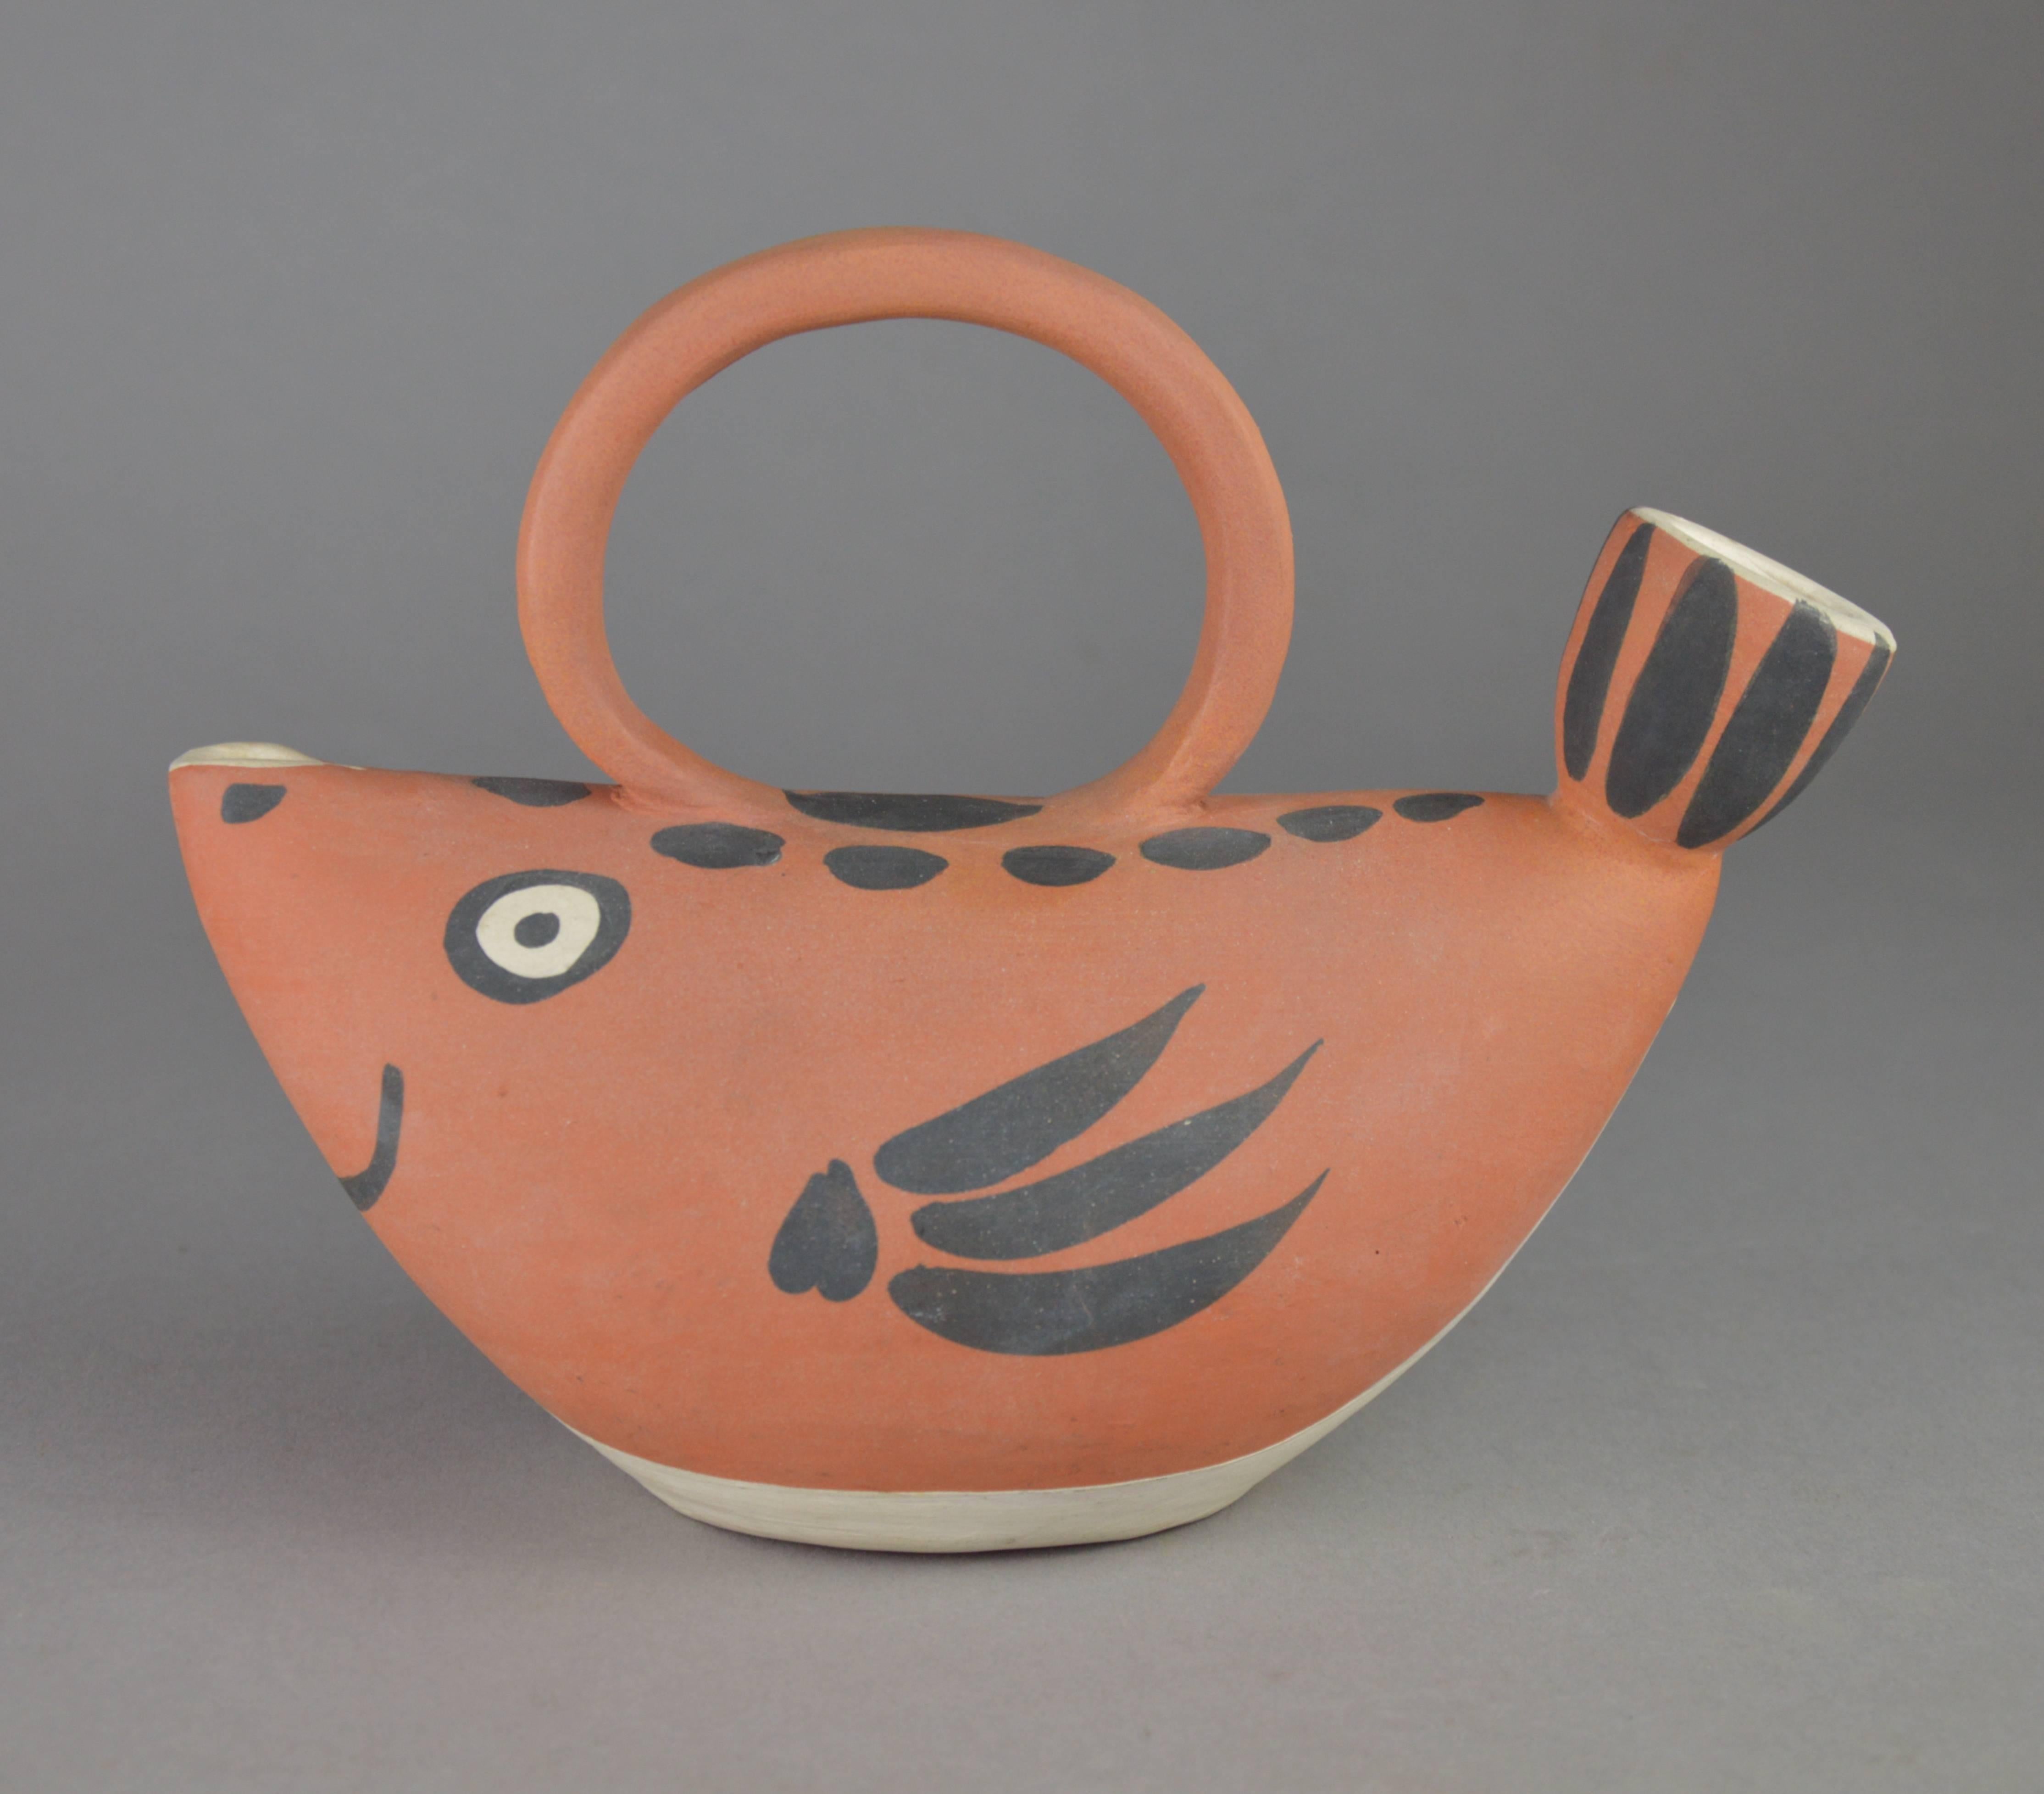 Pablo Picasso turned ceramic pitcher fish ("poisson"). Red earthenware clay, engobe decoration, Executed in an edition of 500 copies. Stamped and market 'Edition Picasso or Madoura Plein Feu'. Conceived in 1952. Literature: Alain Ramié